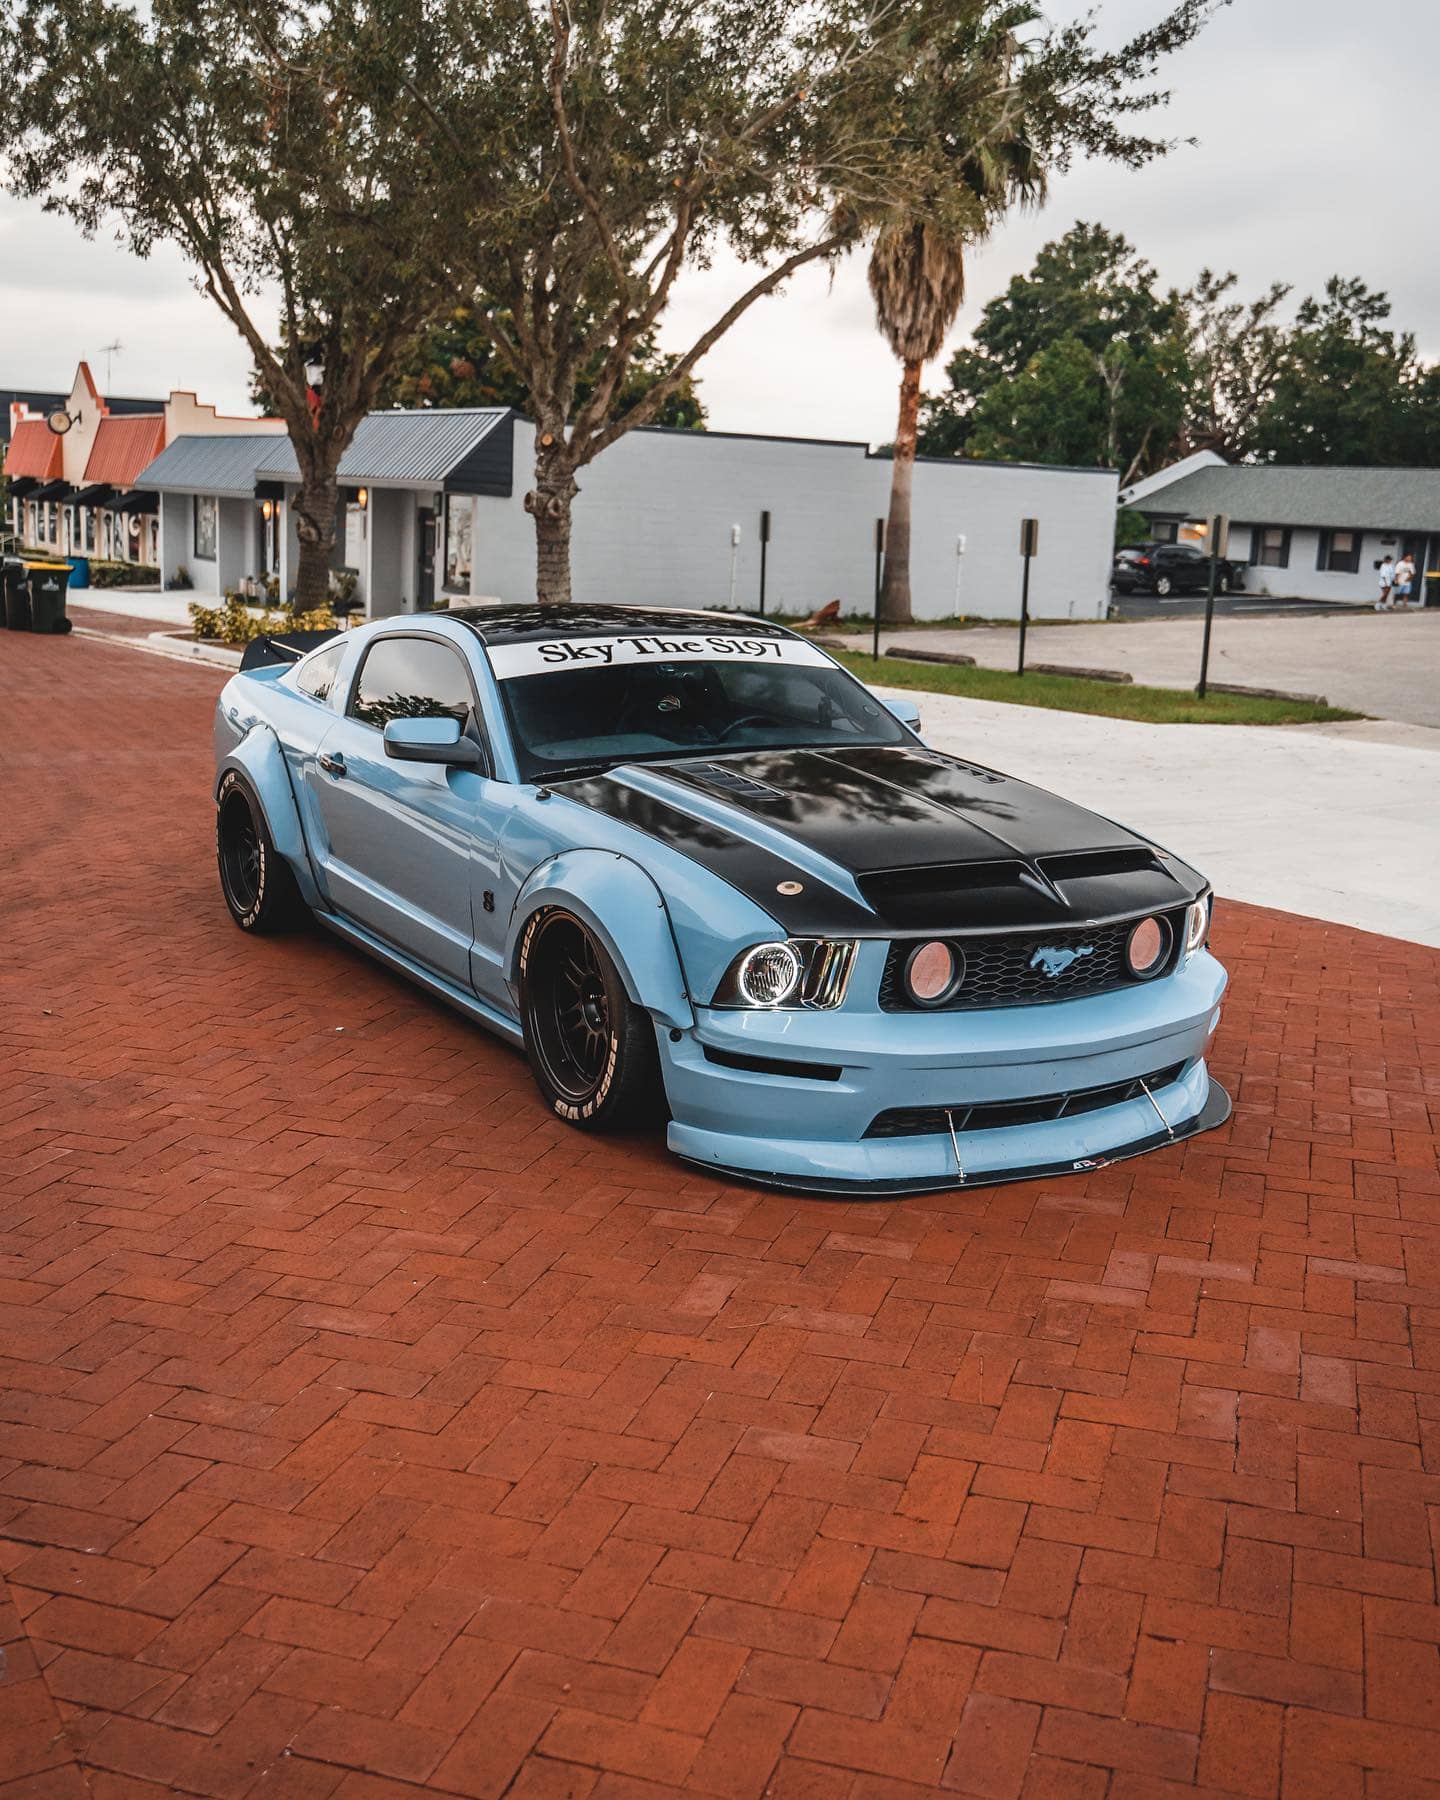 Slammed Ford Mustang S197 with Air suspension Raceland Coilovers Converted to Bags